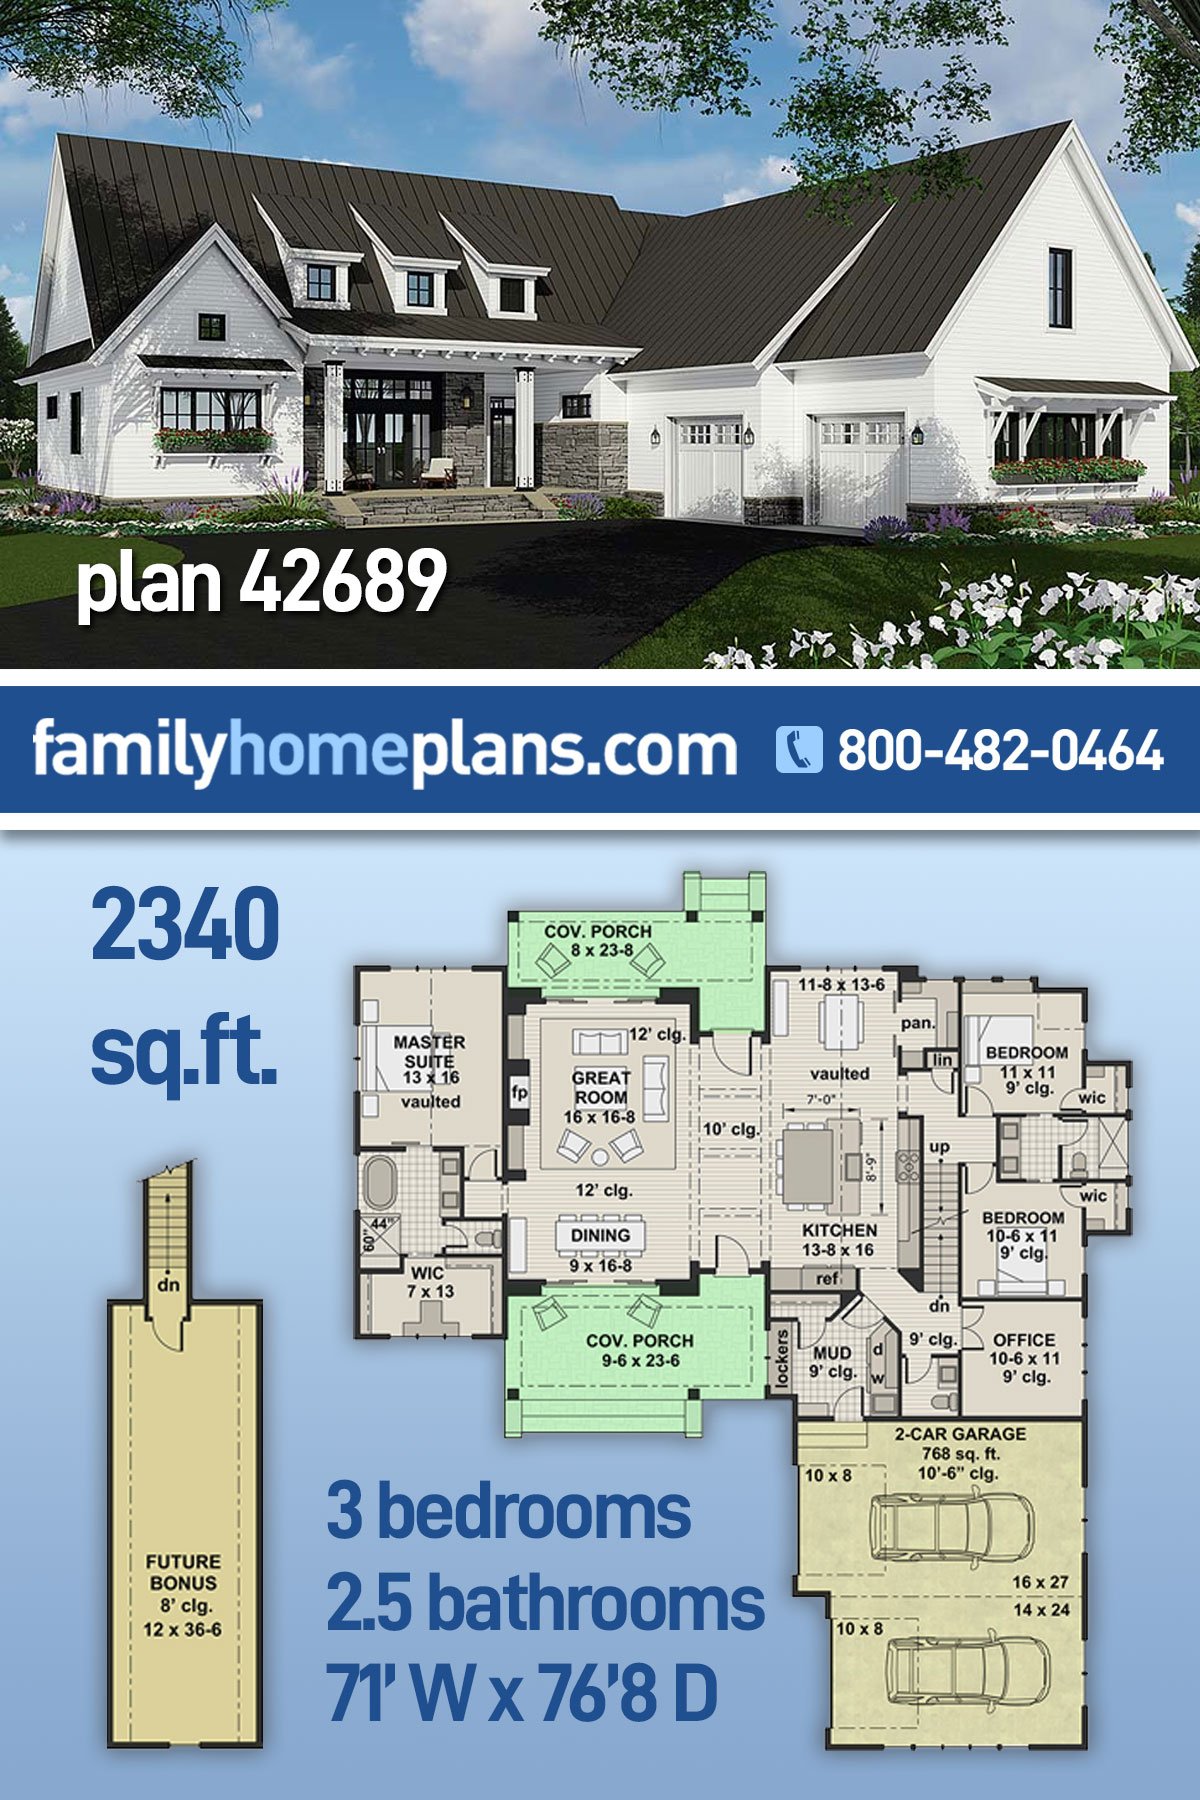 Bungalow, Cottage, Craftsman, Ranch House Plan 42689 with 3 Beds, 3 Baths, 2 Car Garage